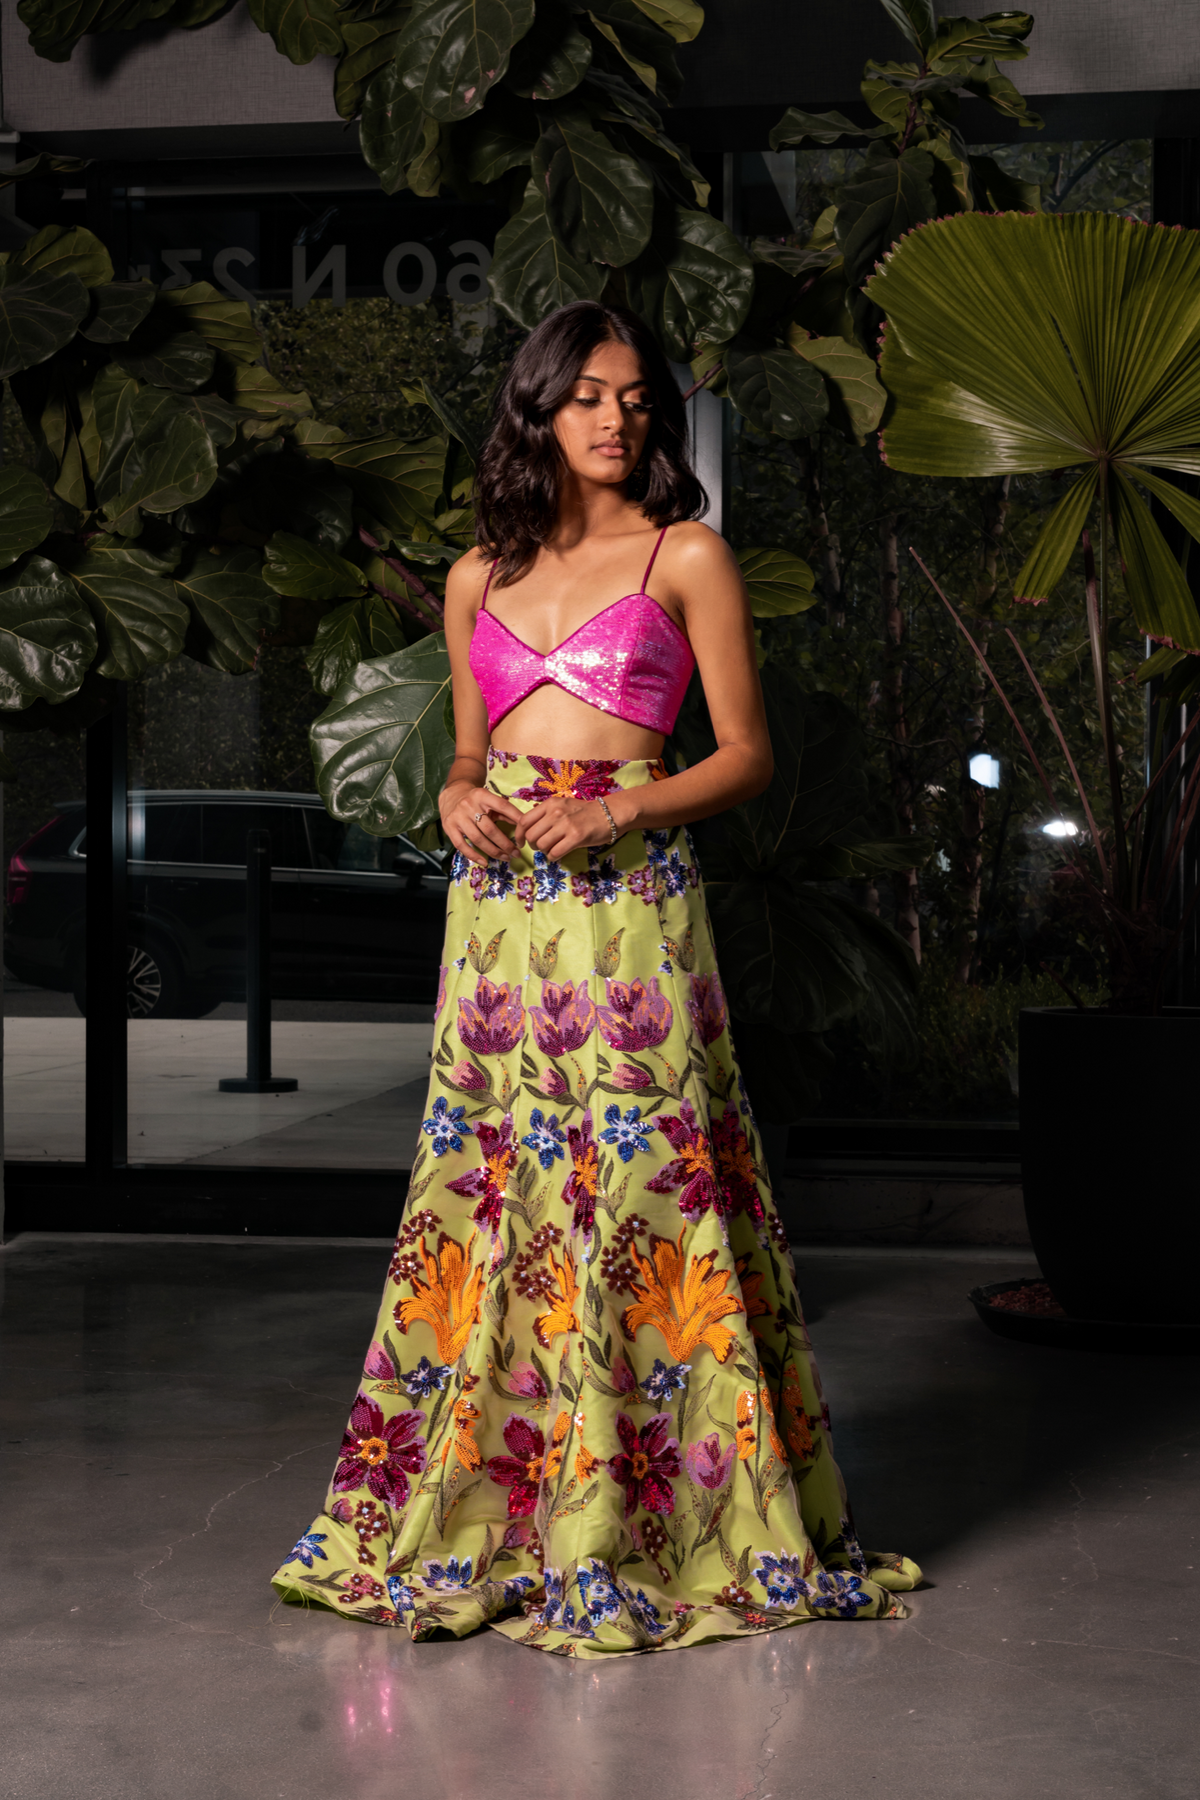 model posing in a high waisted, lime green floral sequin gabriella lehenga skirt. Styled with a neon iridescent pink sequin bralette top.